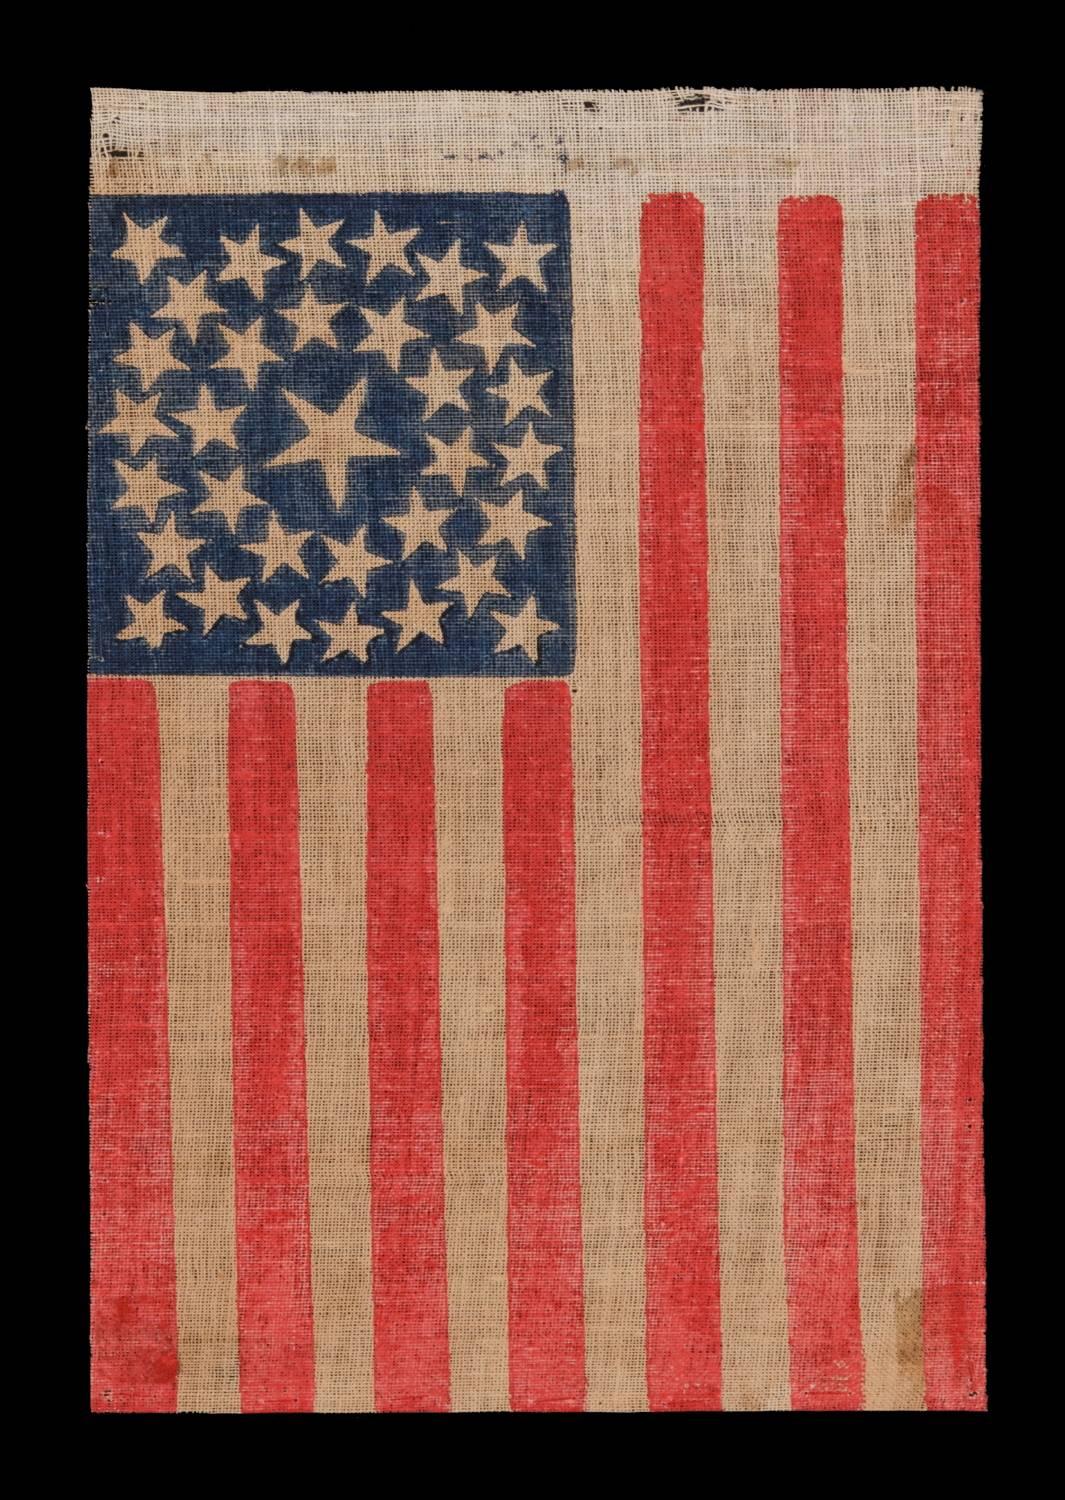 33 STARS, MEDALLION CONFIGURATION, PRE-CIVIL WAR THROUGH WAR PERIOD, 1859-1861: 

 33 star American national parade flag, printed on coarse, glazed cotton. The stars are arranged in a double wreath pattern with a large center star and 4 flanking